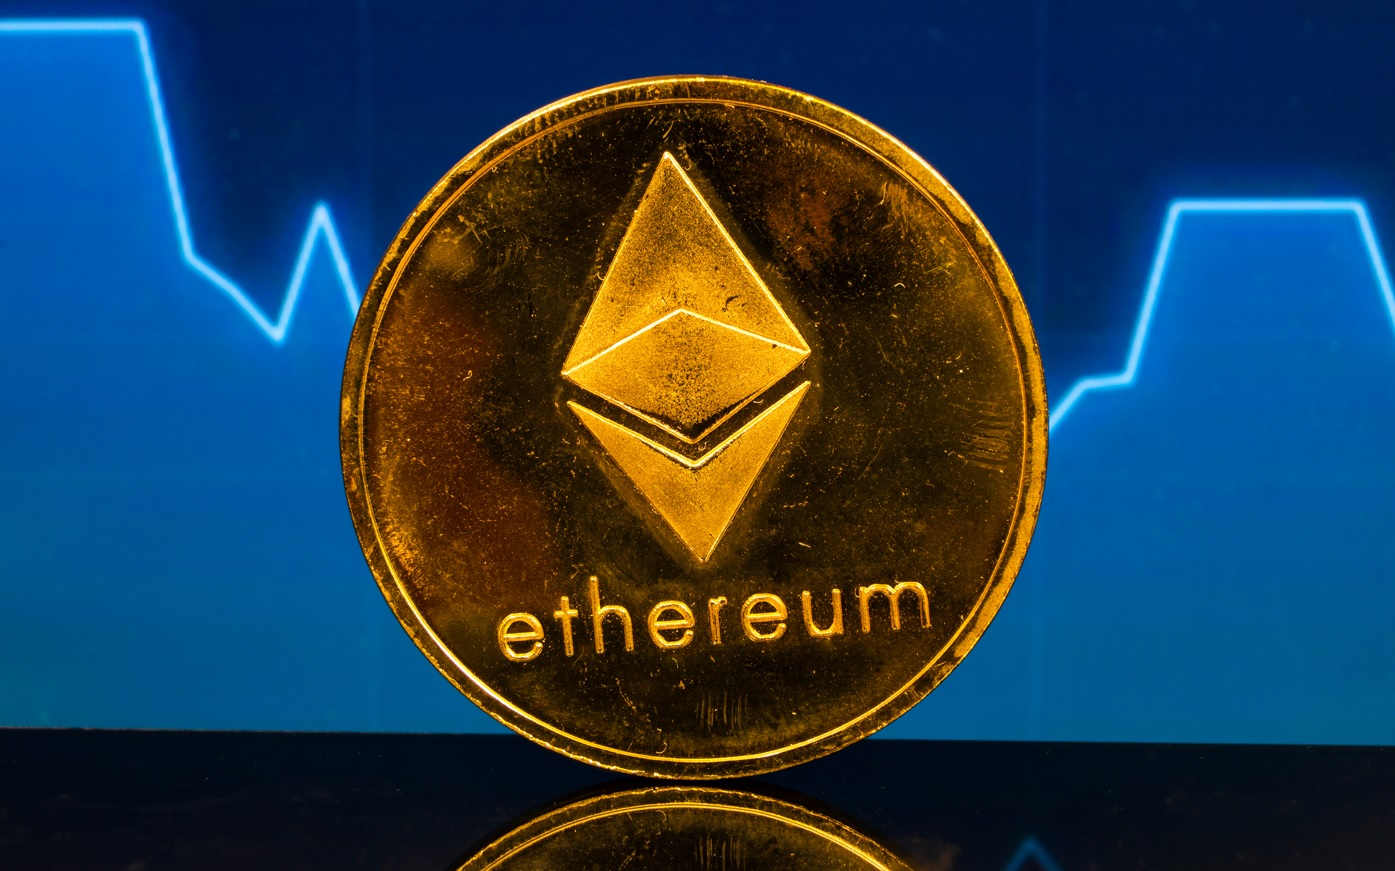 ETH addresses with large balances are paring down their holdings, analyst observes